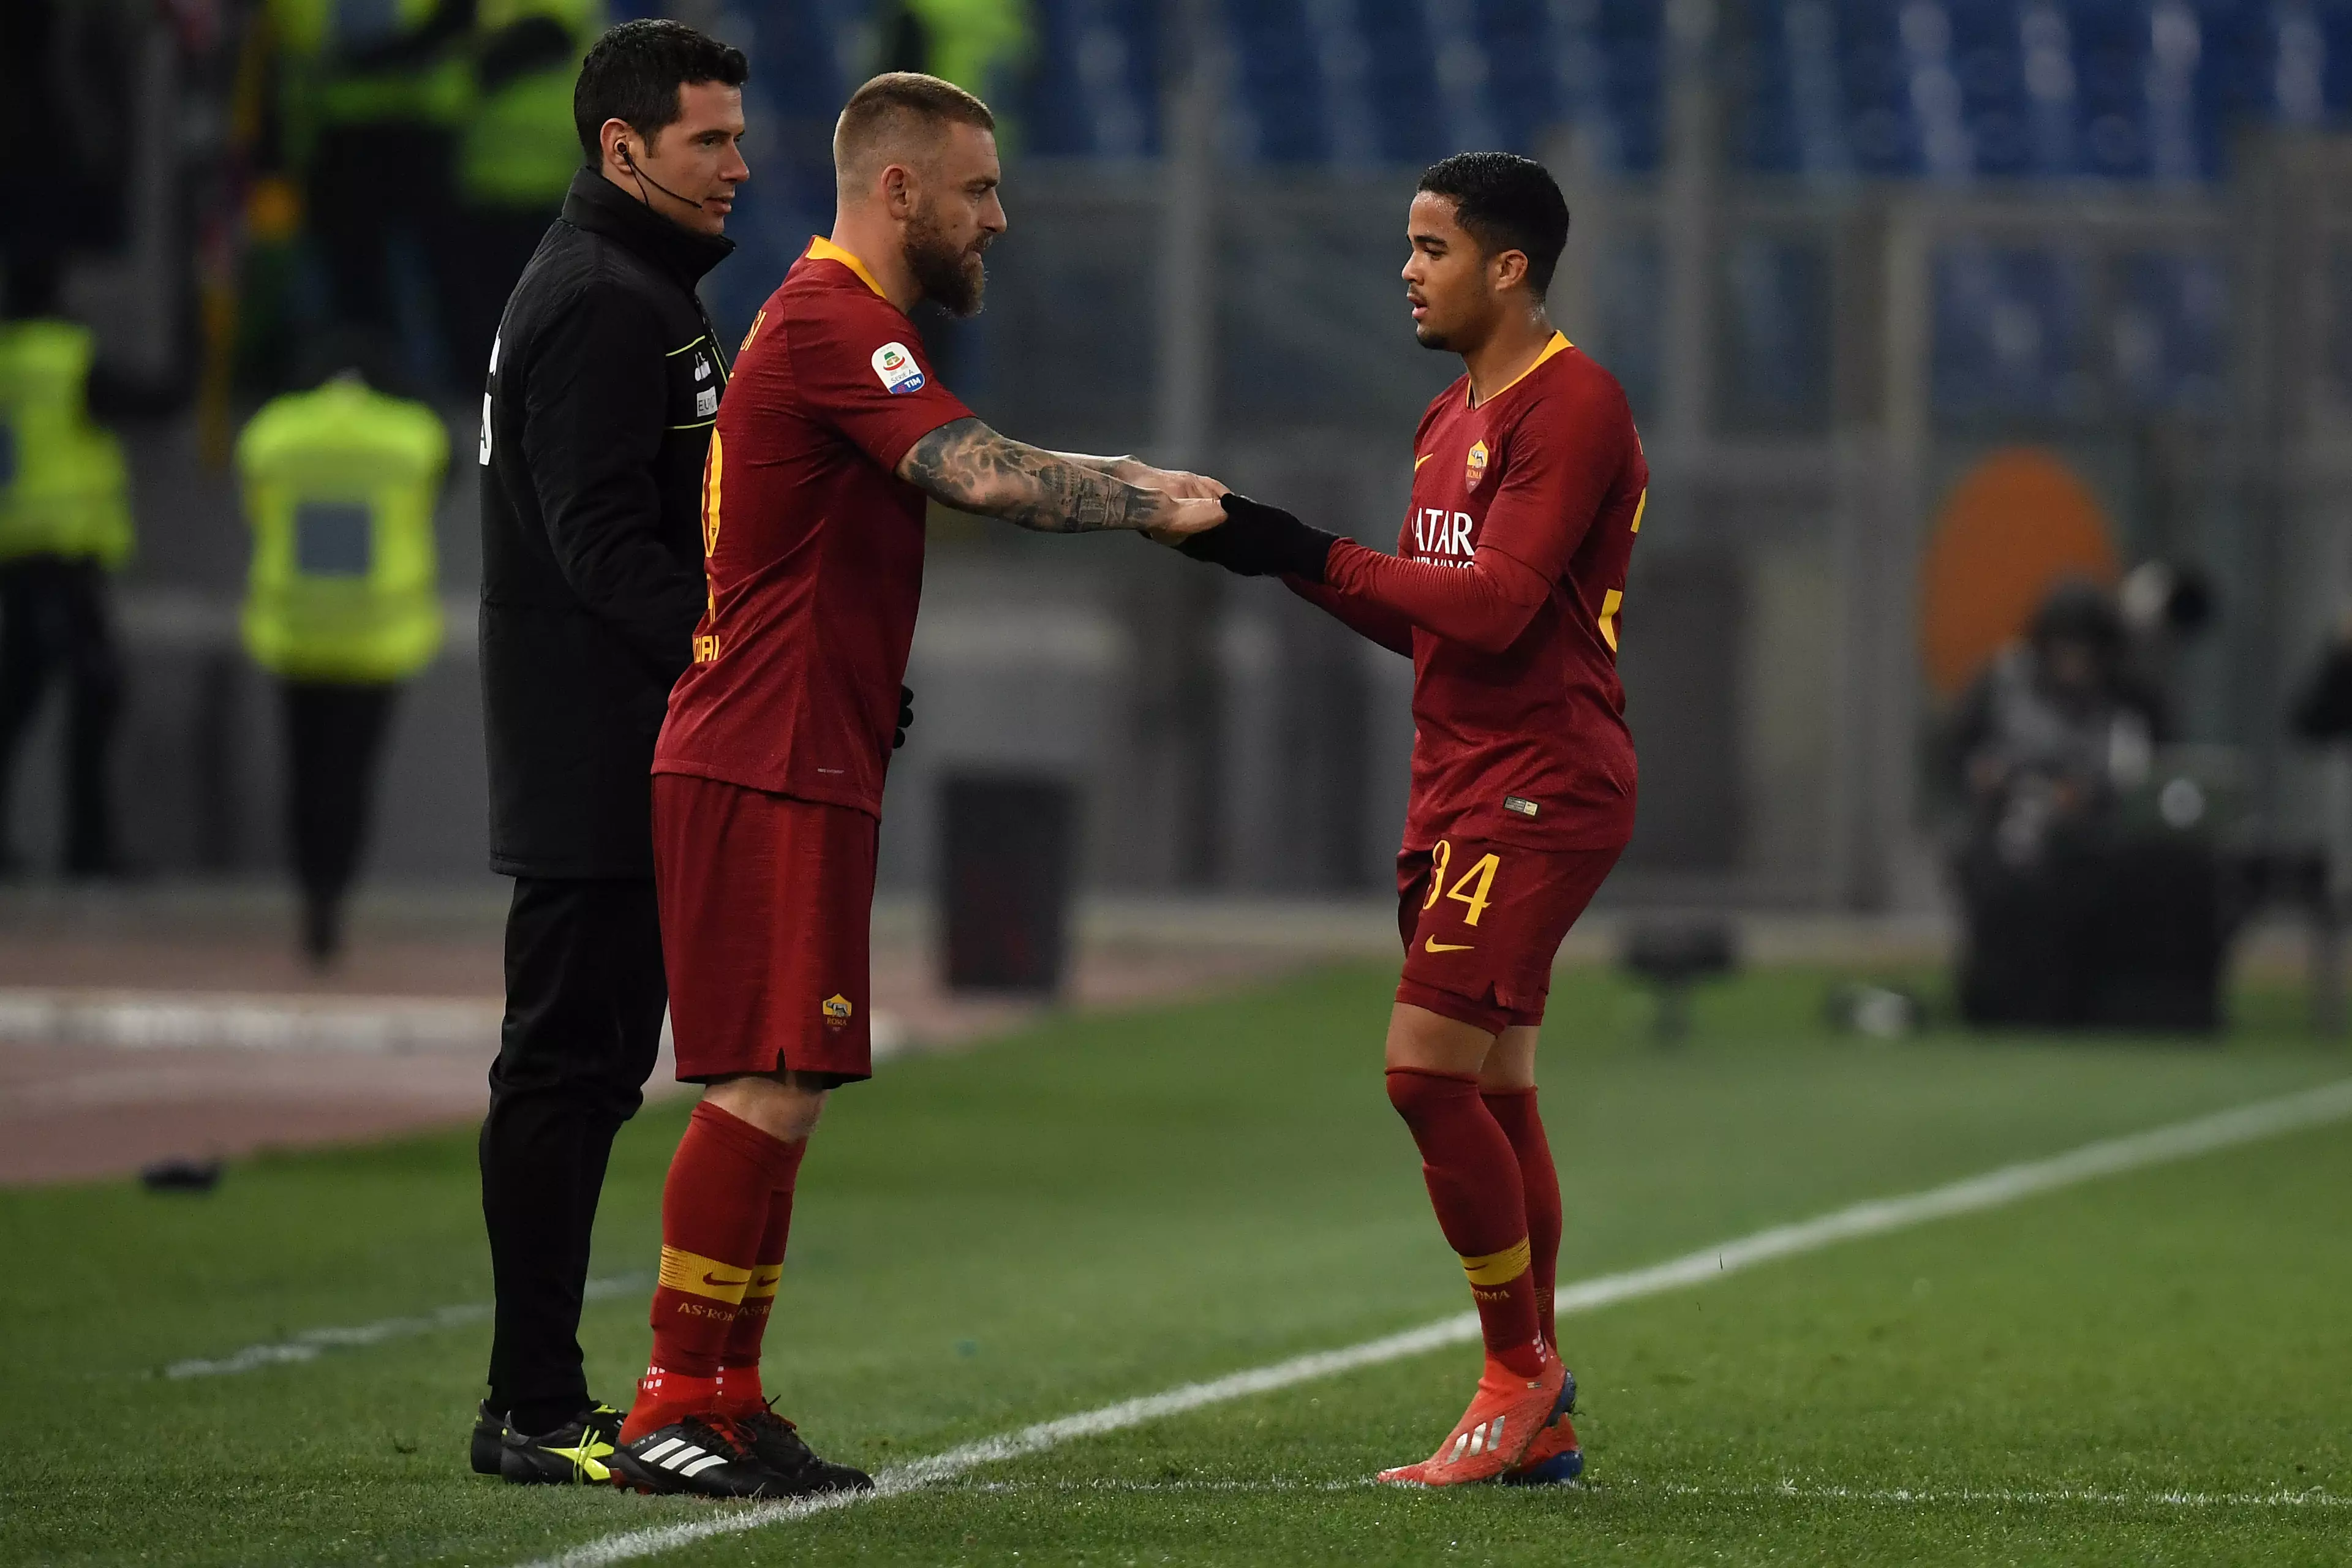 De Rossi comes on as a substitute for Justin Kluivert. Image: PA